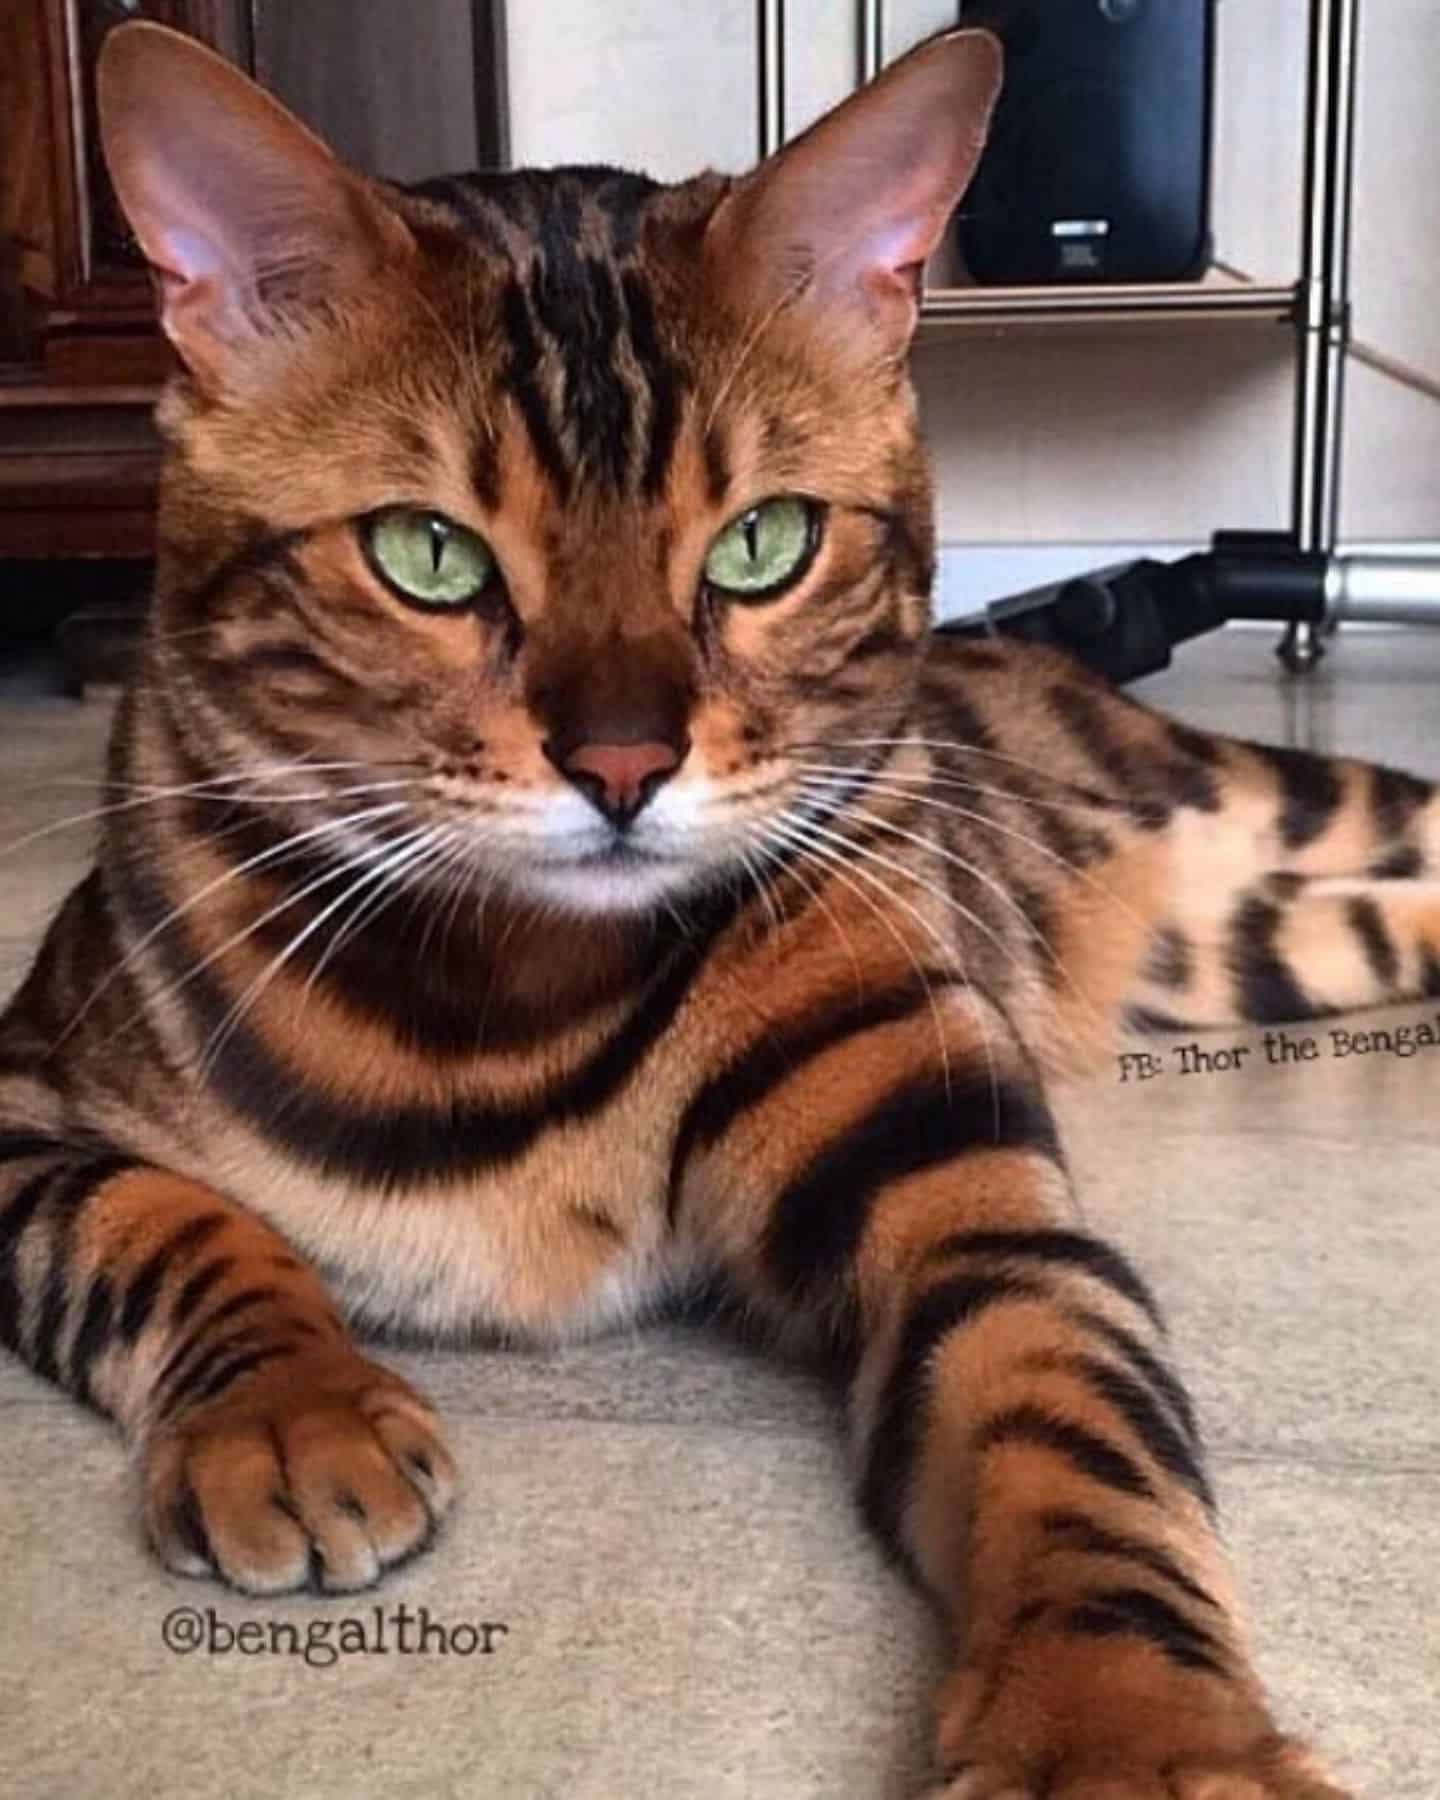 bengal cat in a house